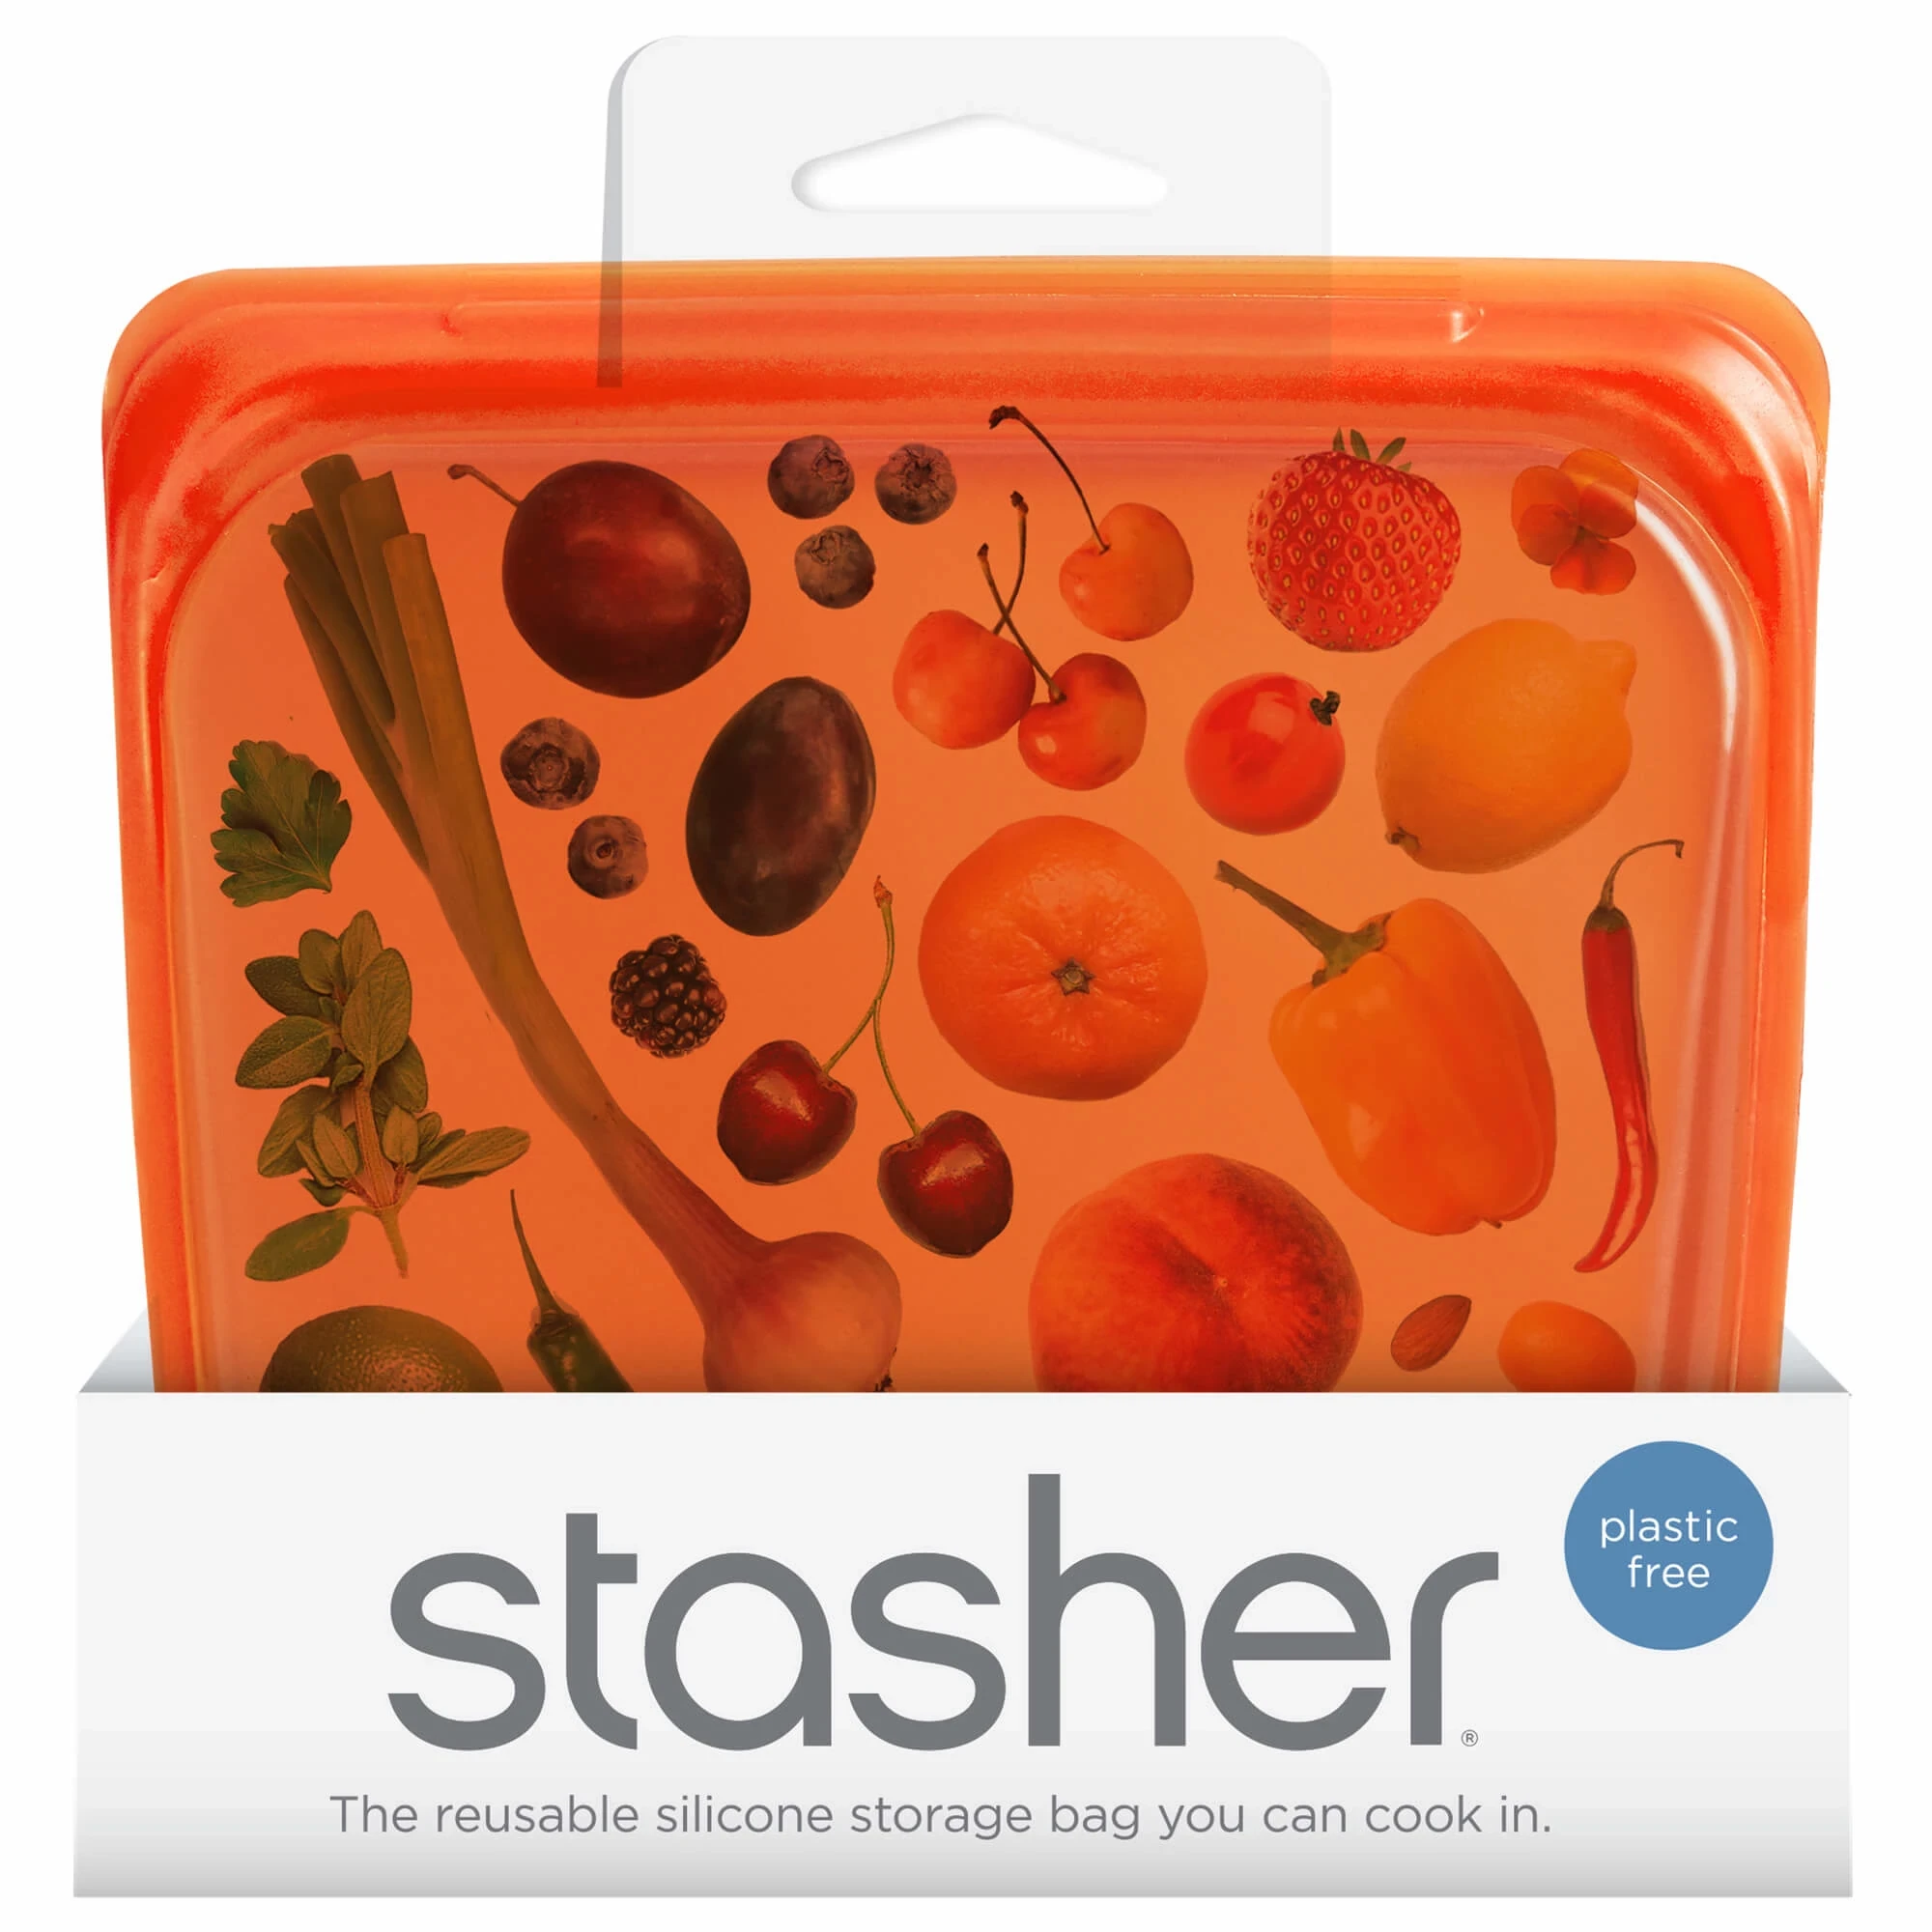 Citrus Stasher Sandwich Bag in product packaging